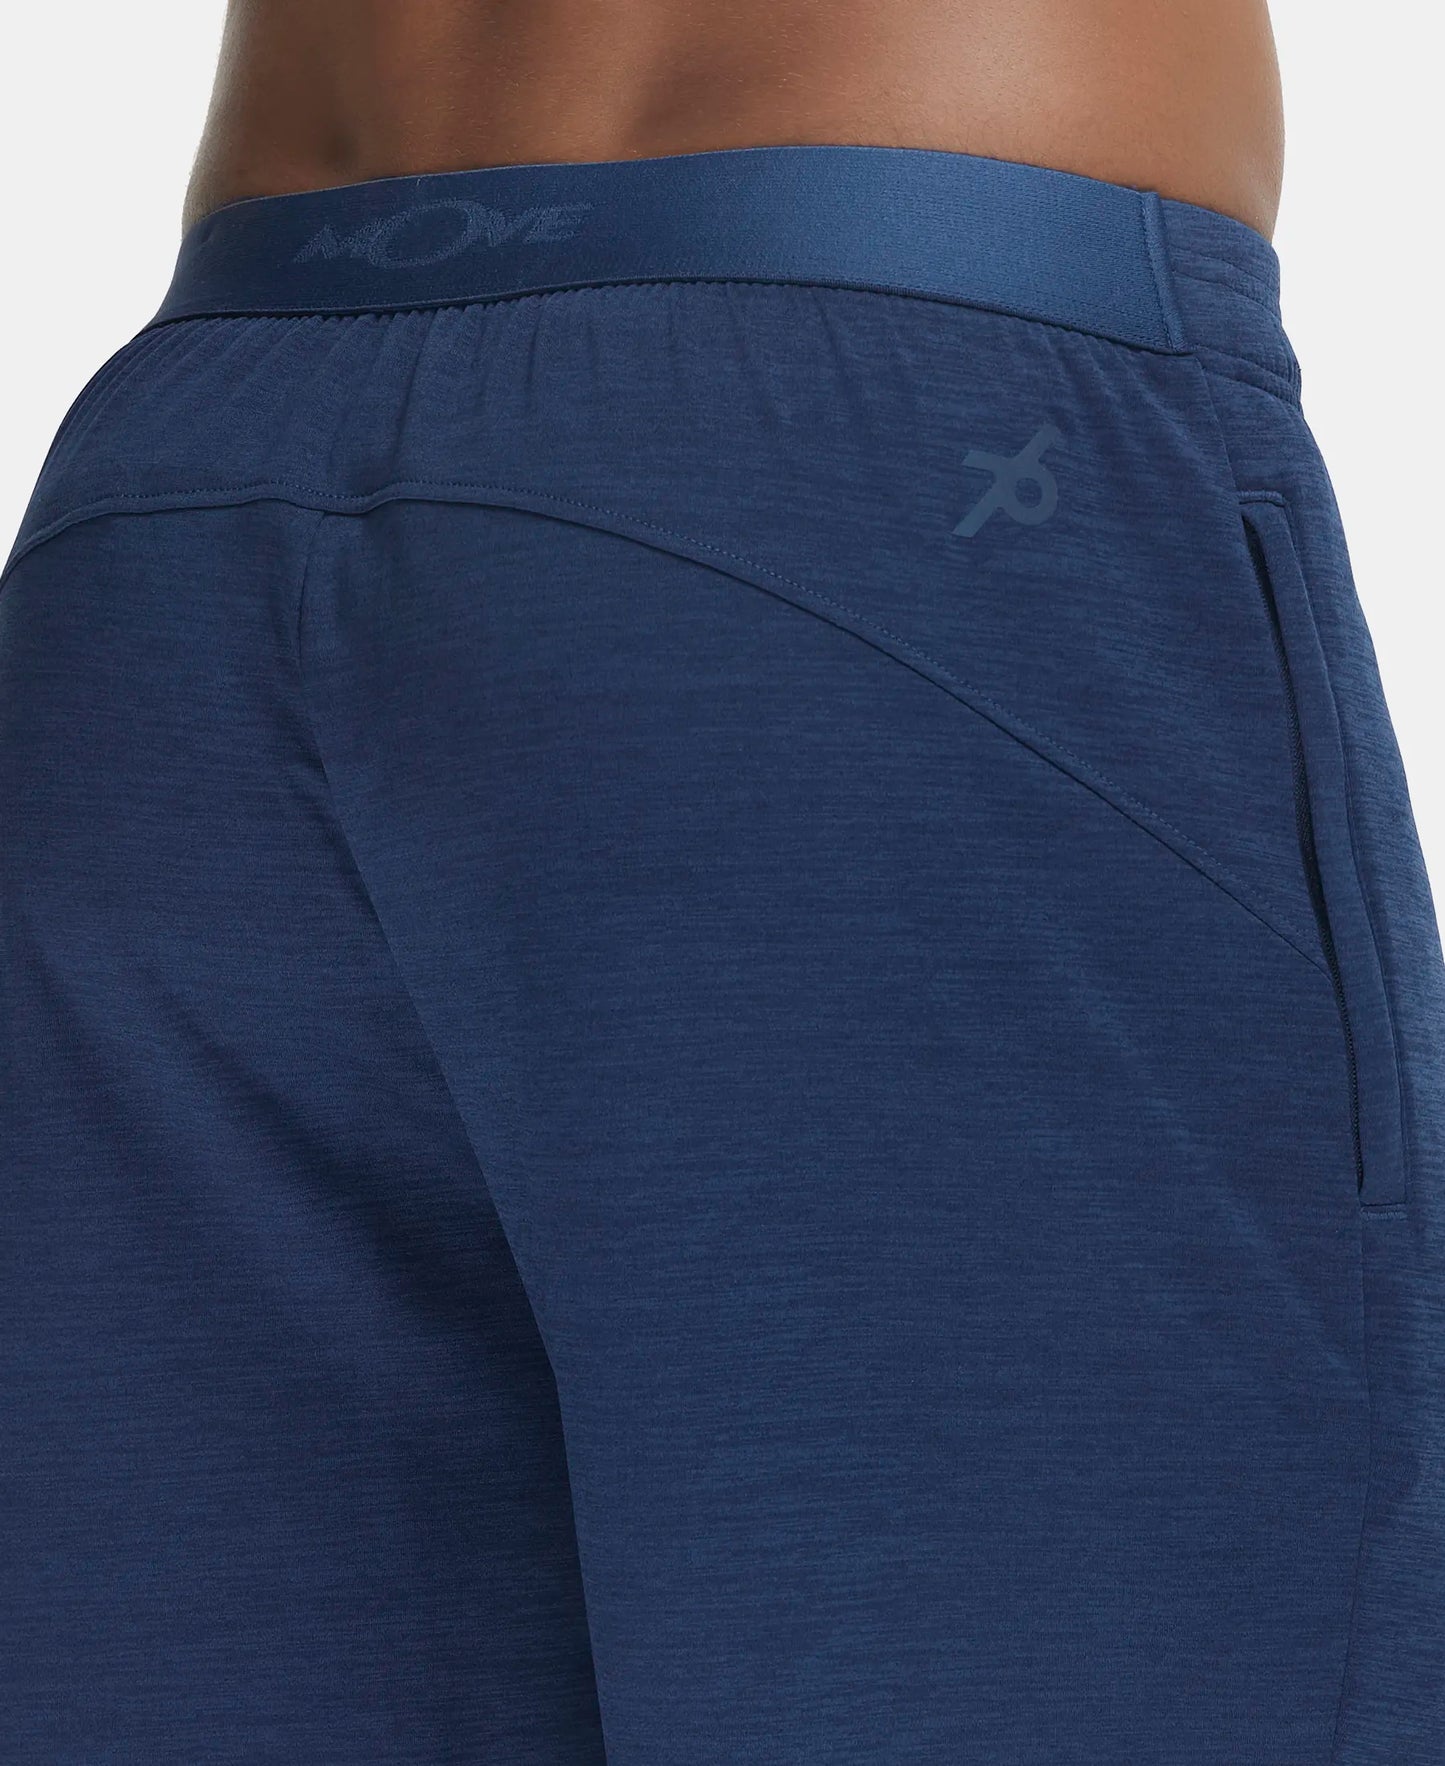 Lightweight Microfiber Shorts with Zipper Pockets and StayFresh Treatment - Insignia Blue-7